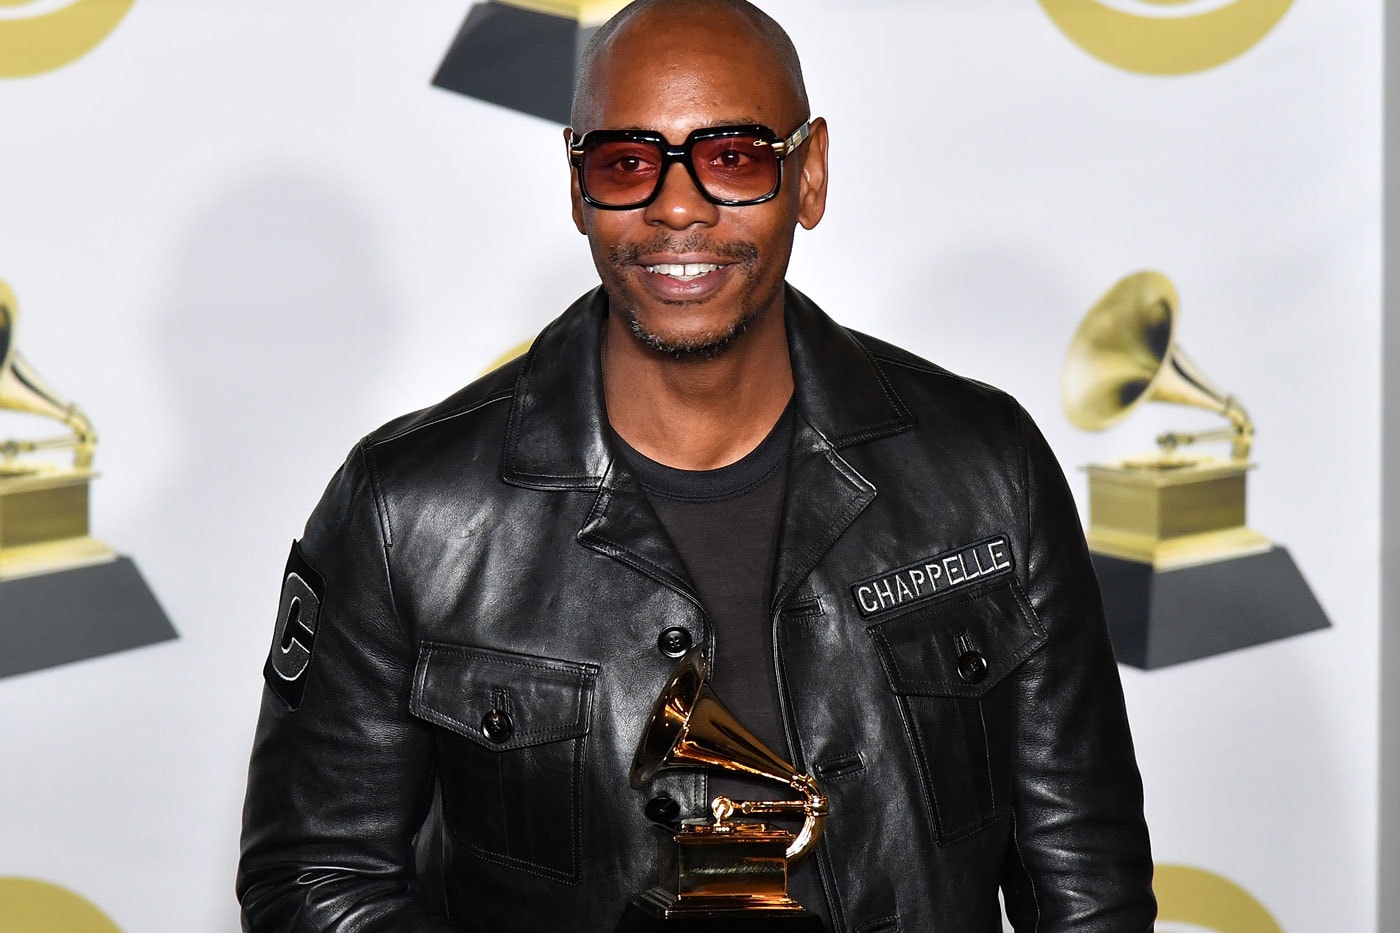 Dave Chappelle T.I. New Album narrate The Dime Trap Instagram Epic Records